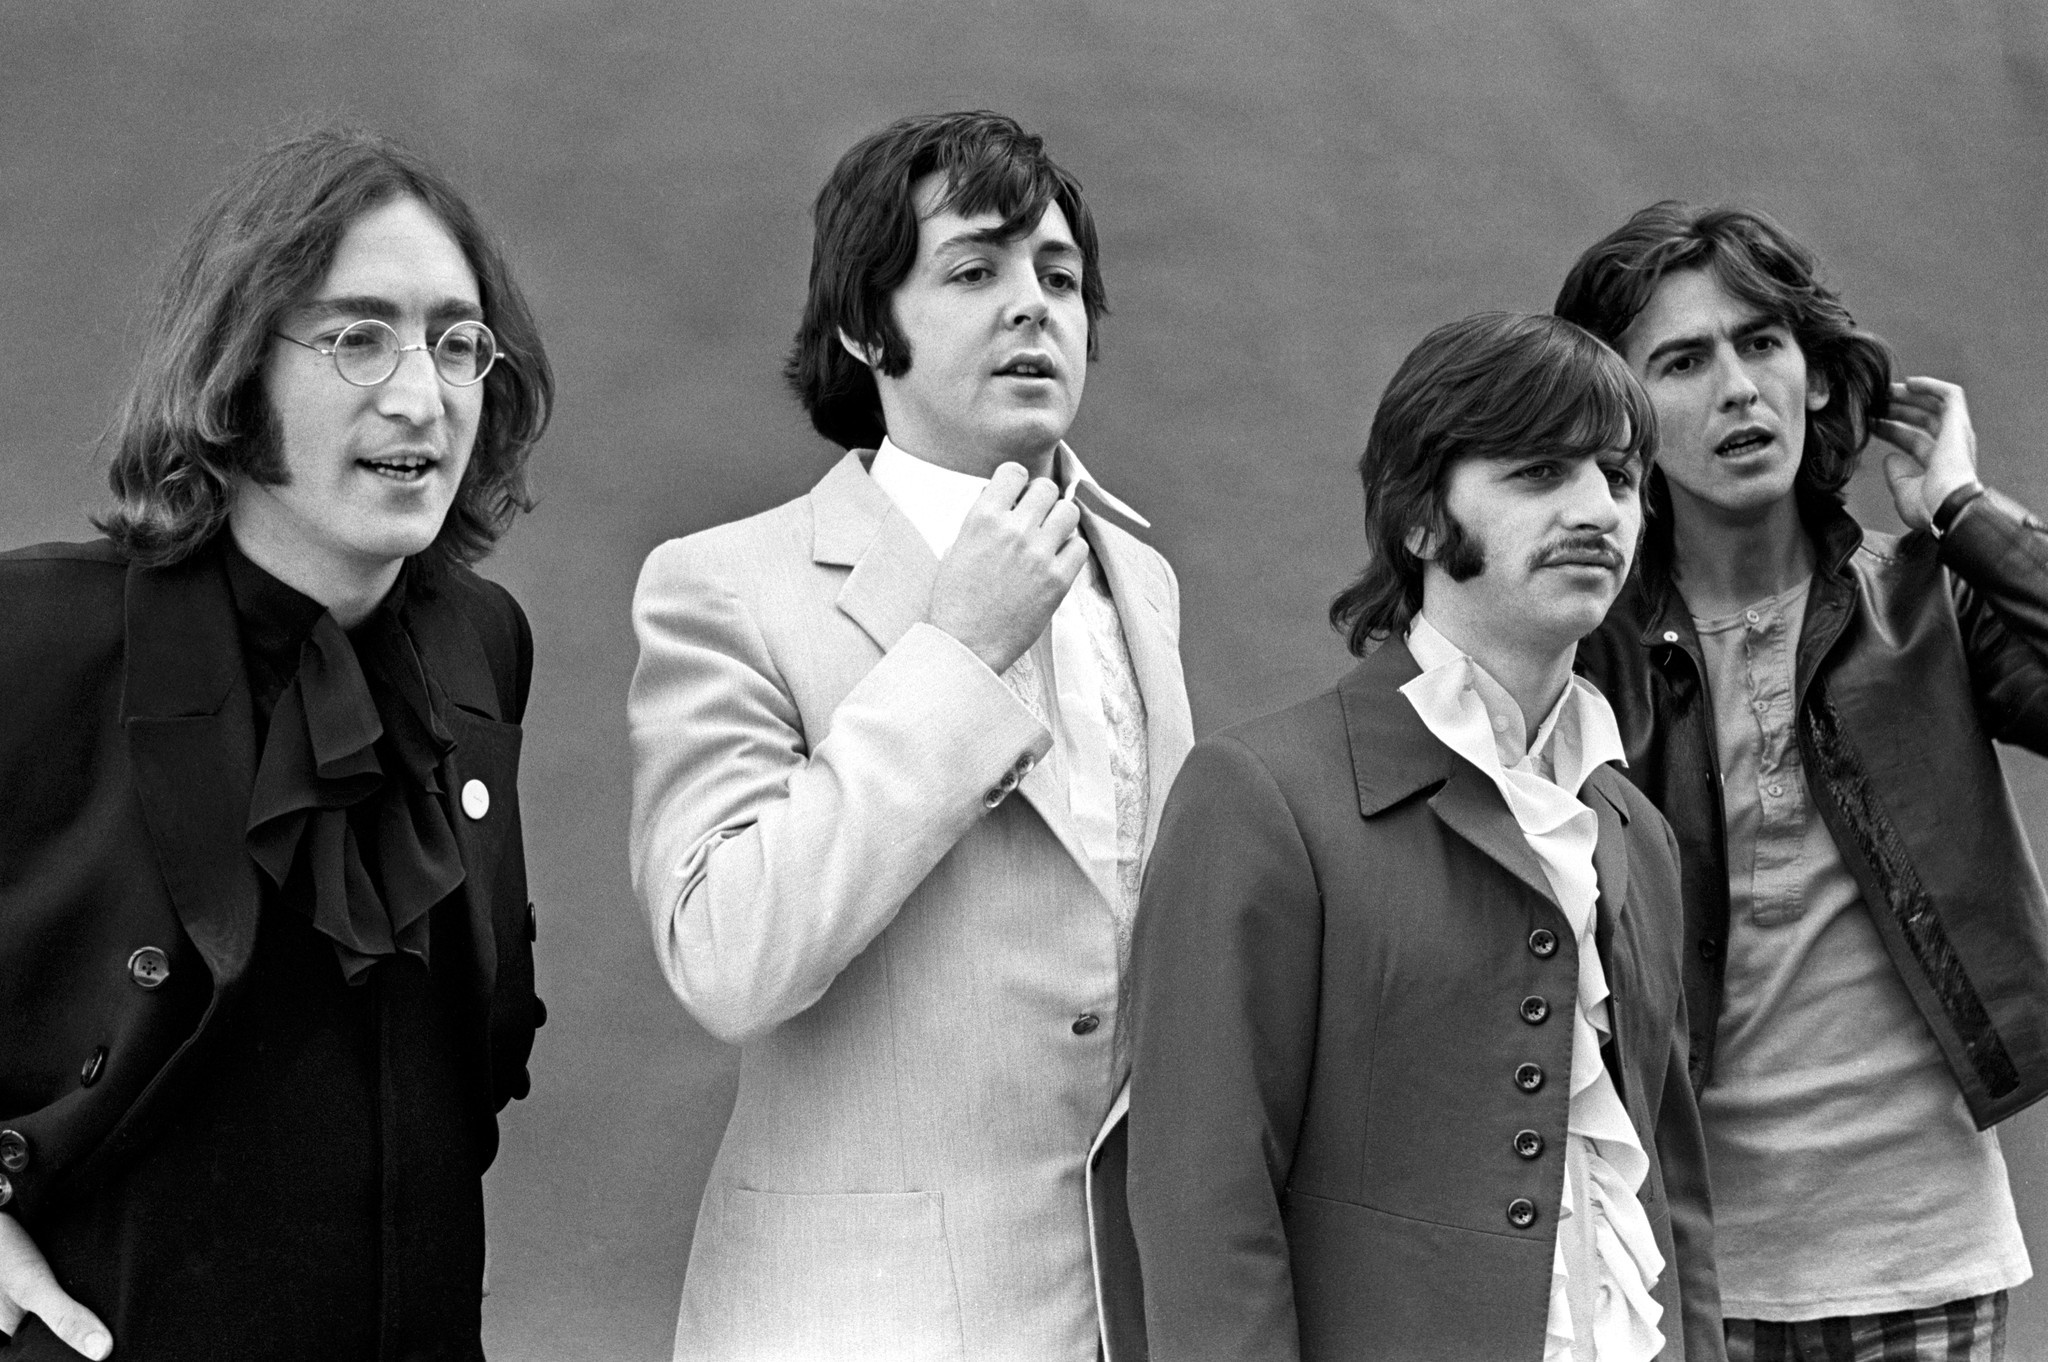 the beatles wallpaper,photograph,social group,black and white,snapshot,photography